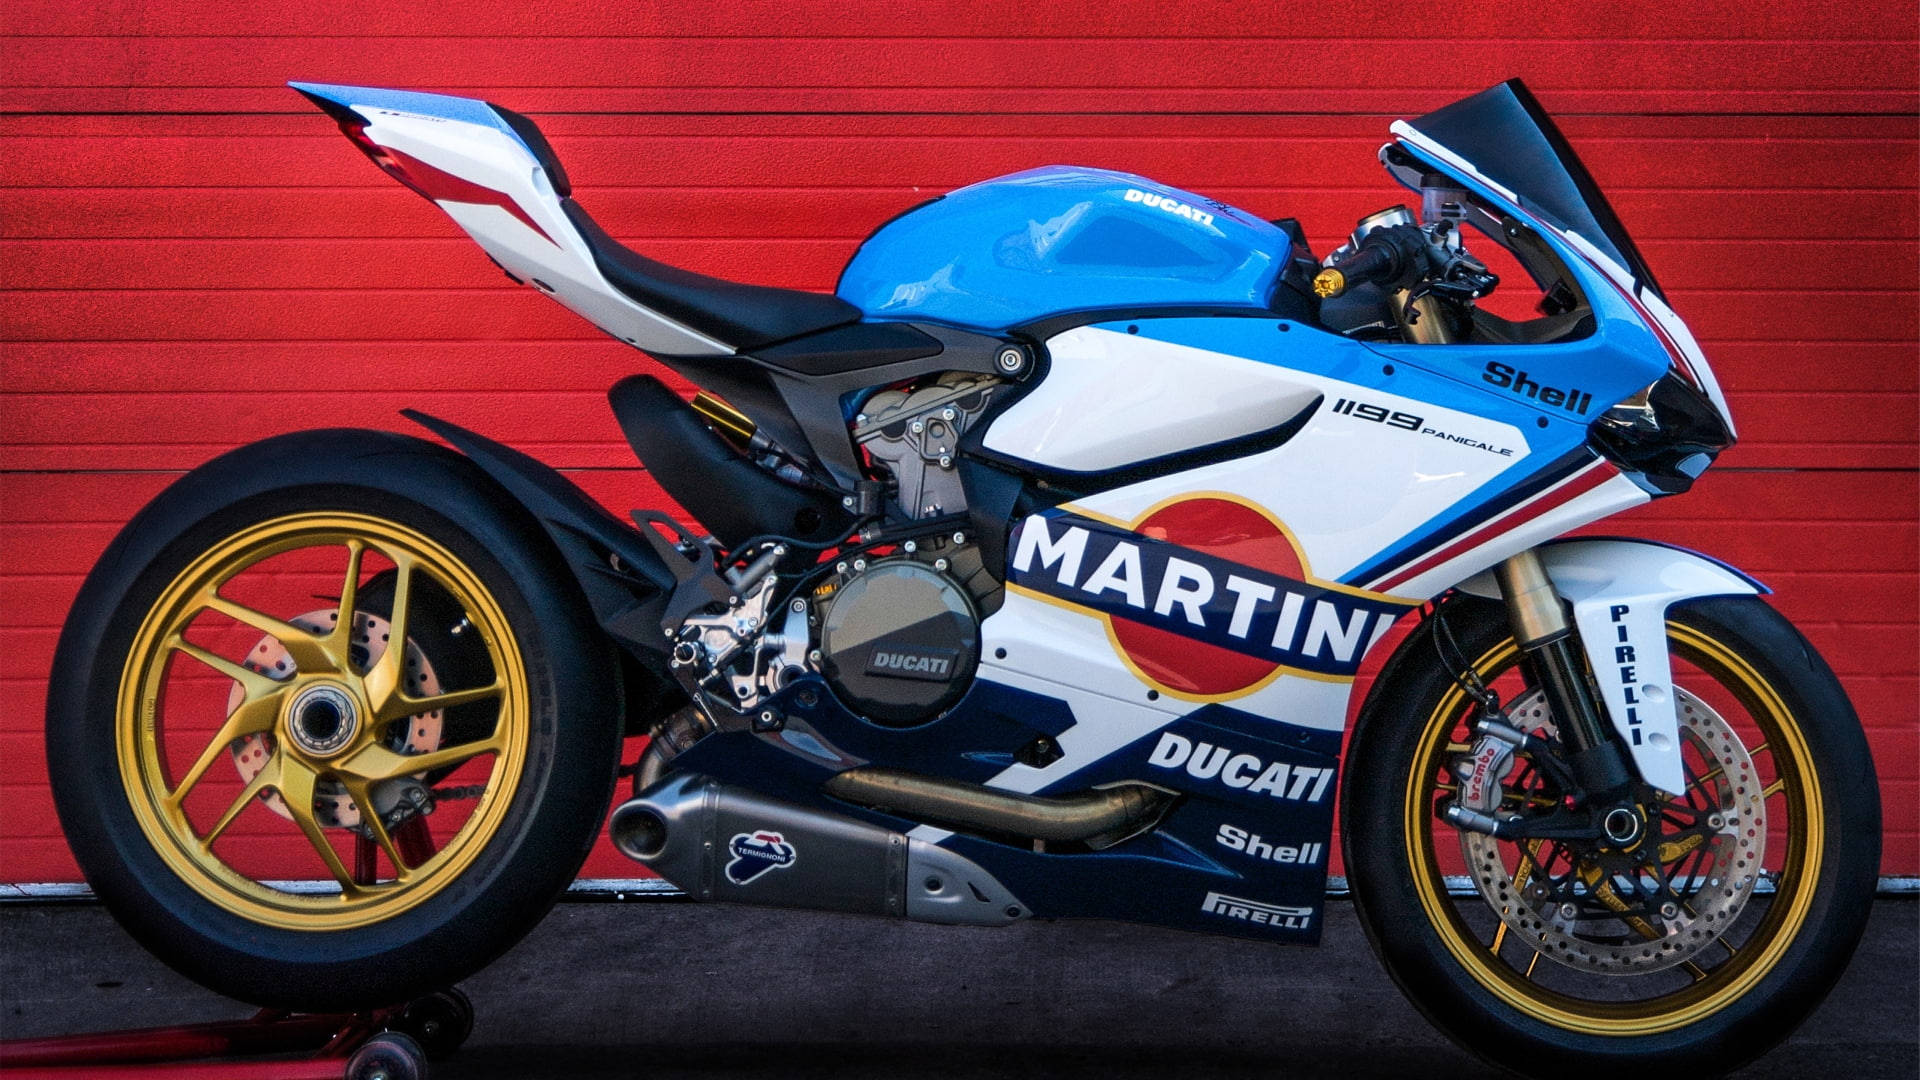 Dominate the Racetrack with the Ducati 1199 Panigale Martini Racing Wallpaper